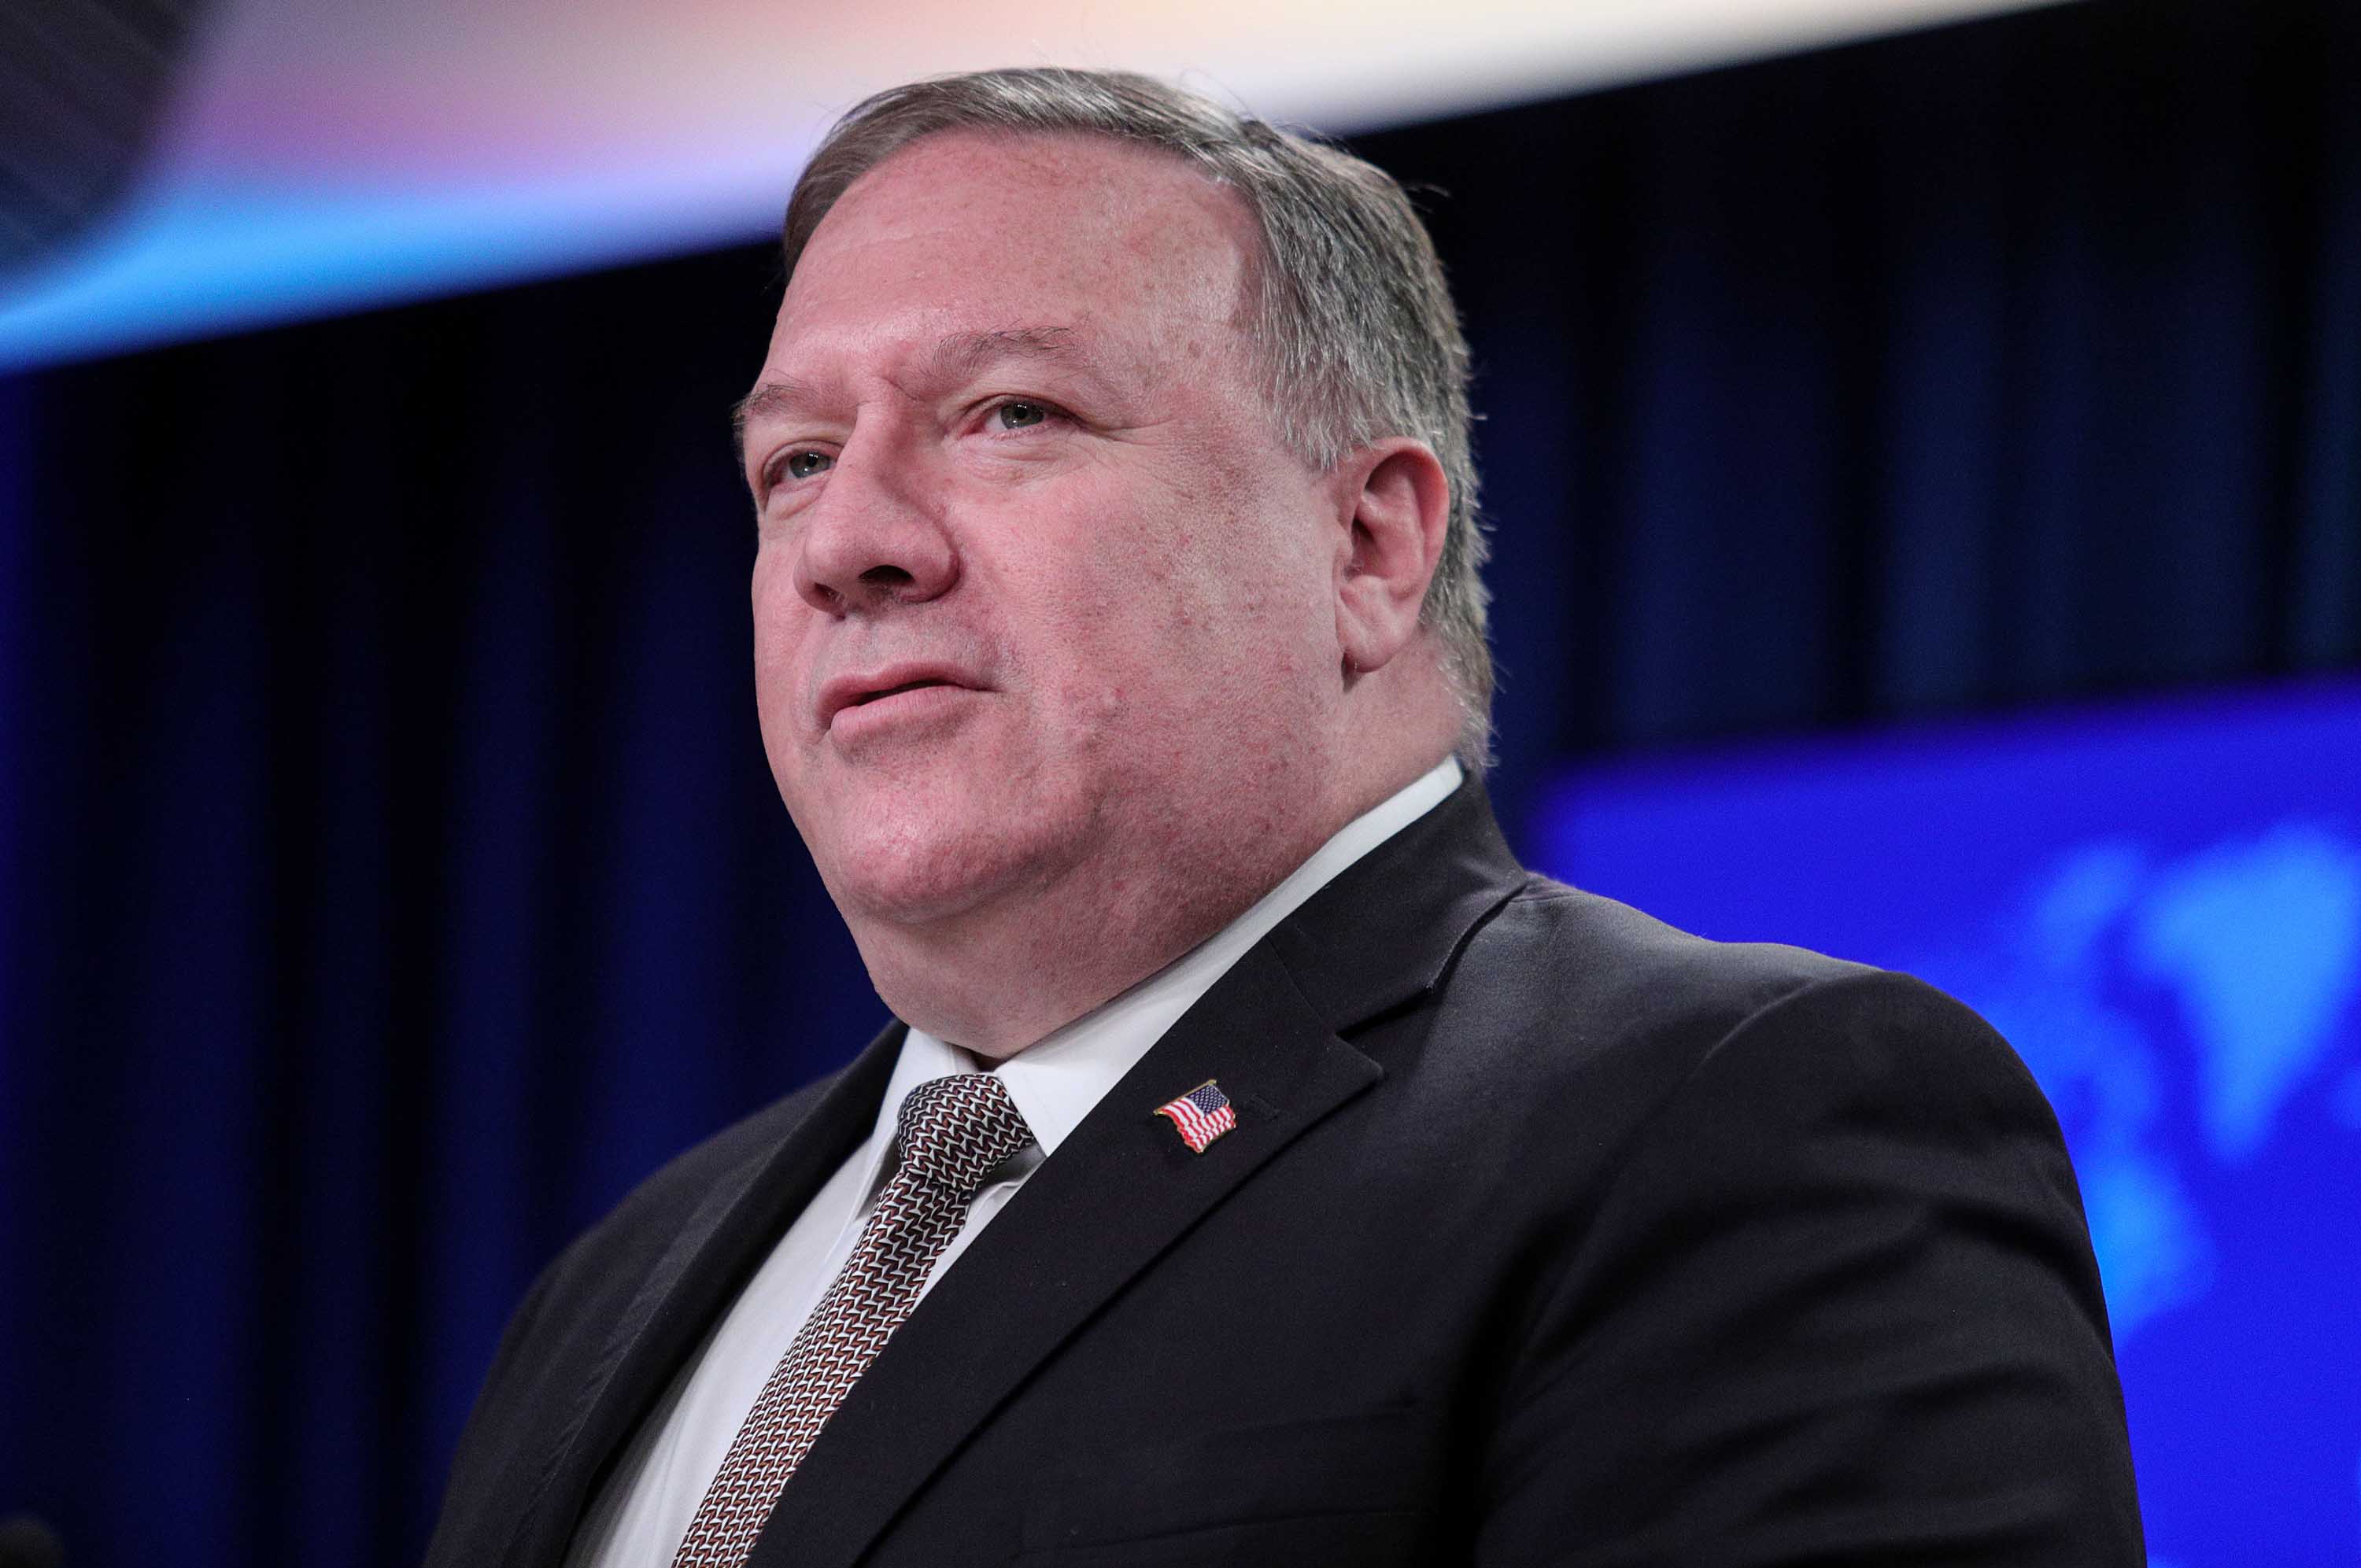 US Secretary of State Mike Pompeo speaks during a news conference at the State Department in Washington on July 8.